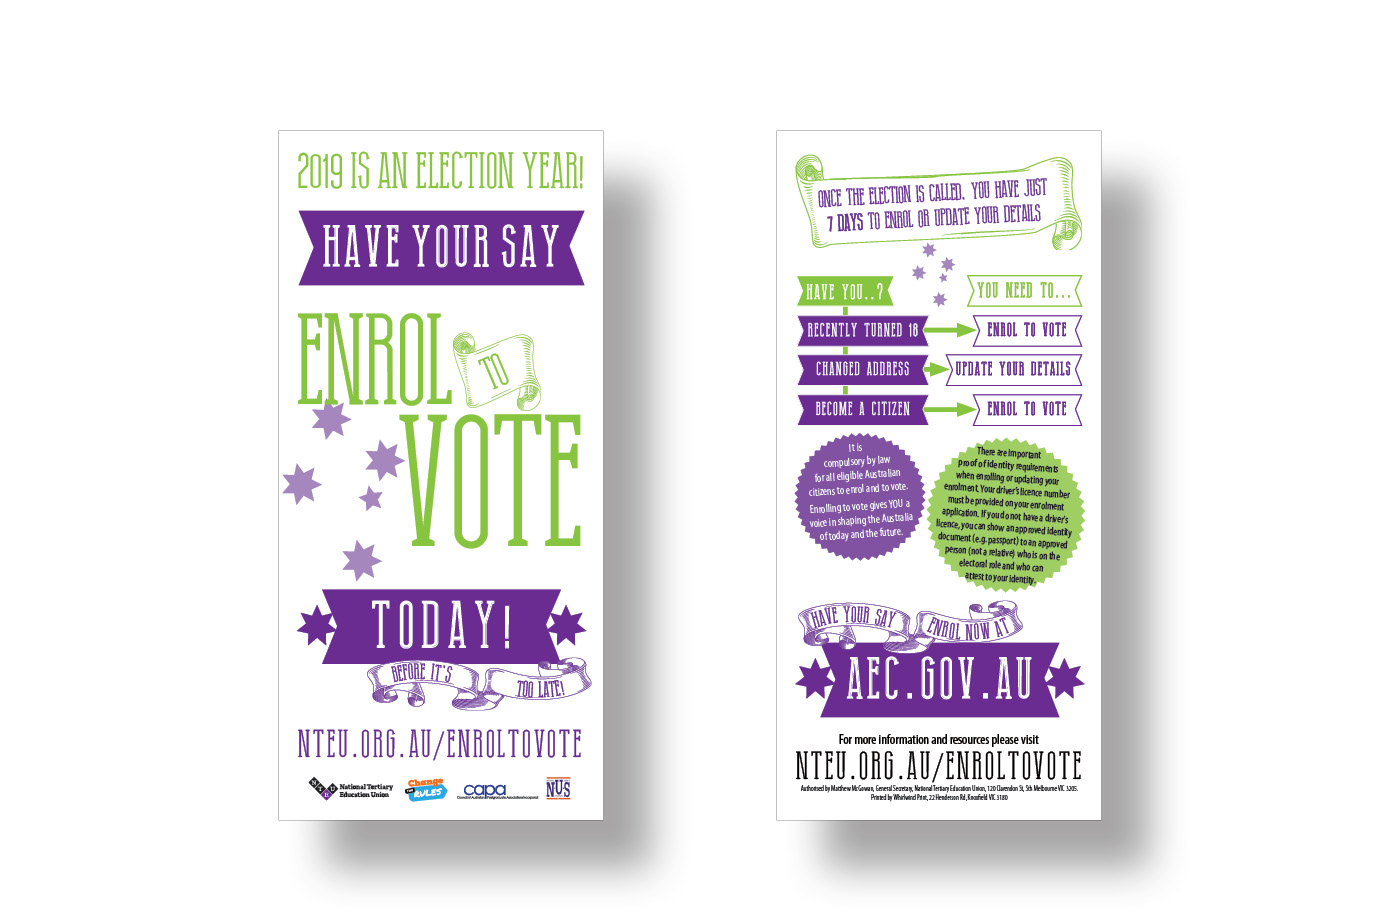 Enrol to Vote flyers